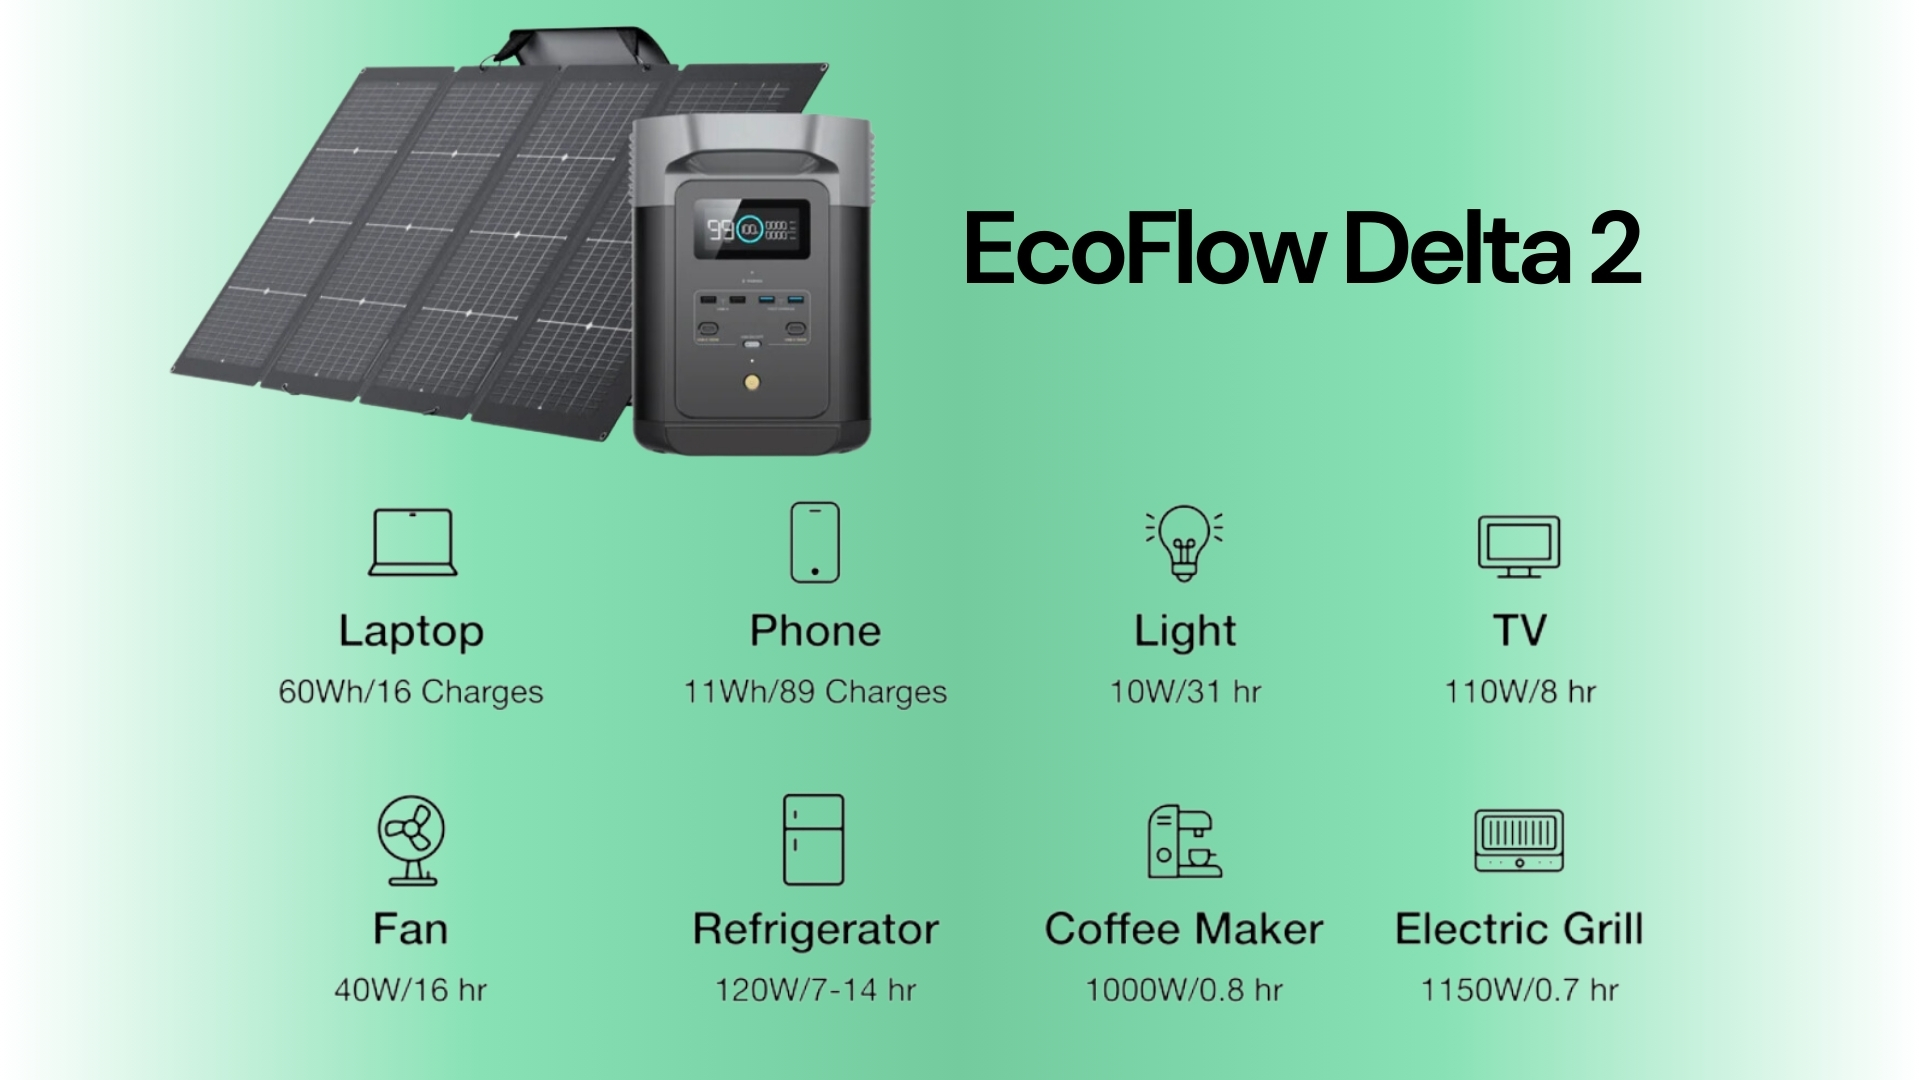 An image of EcoFlow Delta 2 portable solar station, along with some appliances that it can power and their respective maximum usage time.